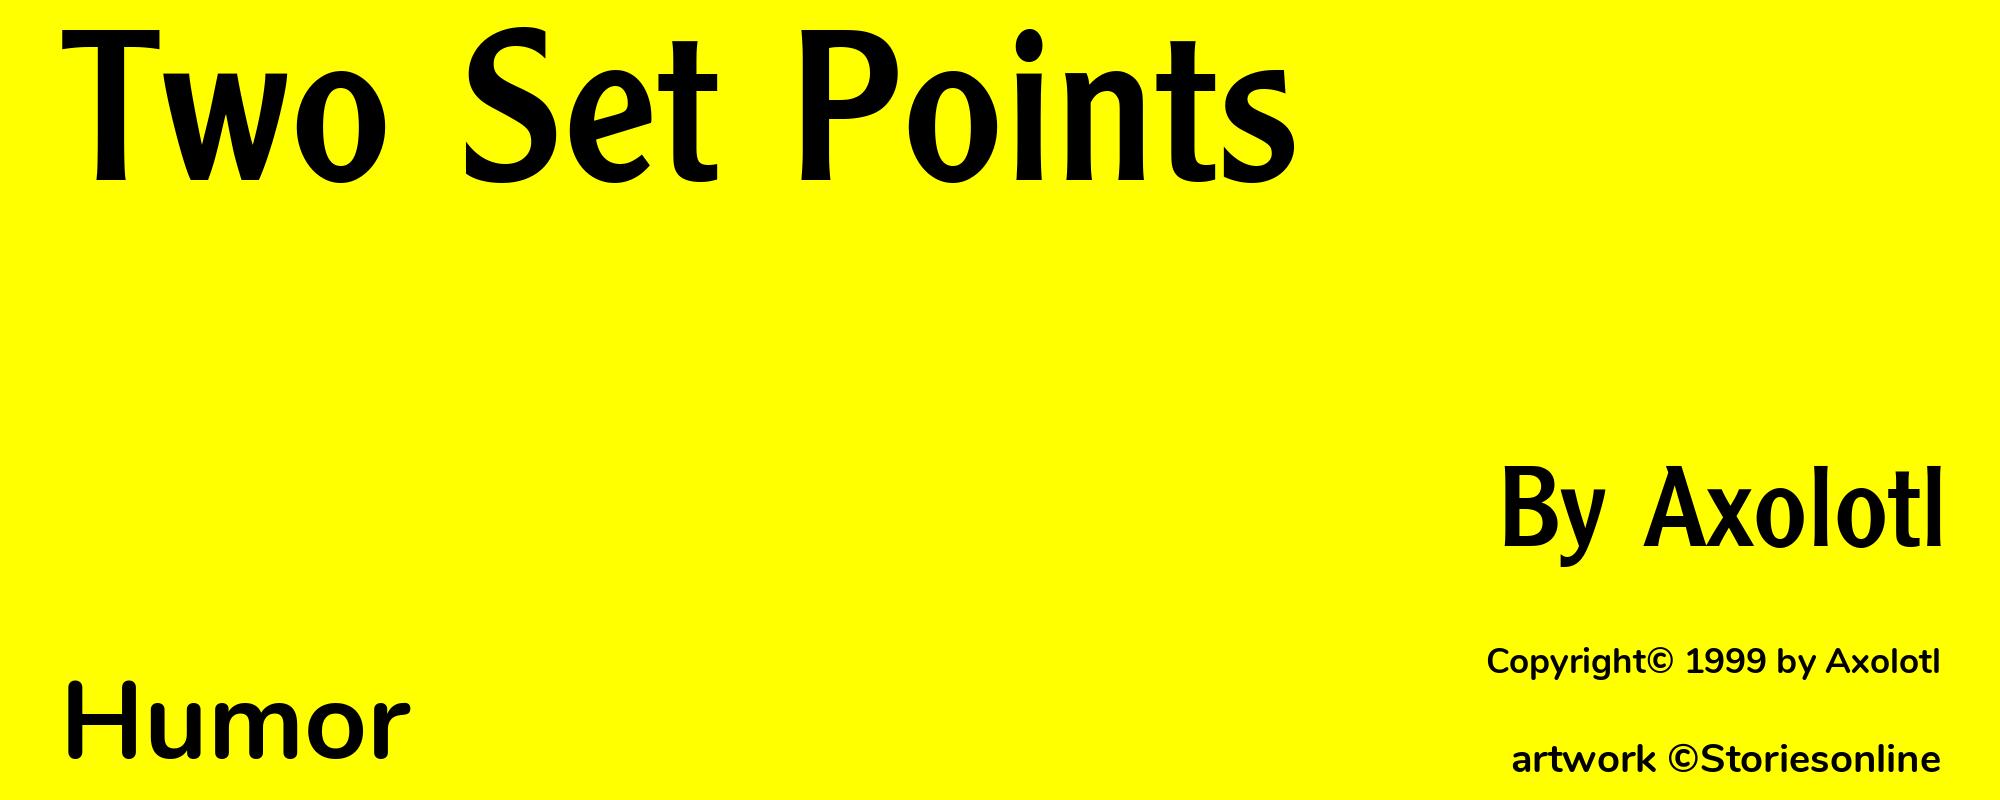 Two Set Points - Cover